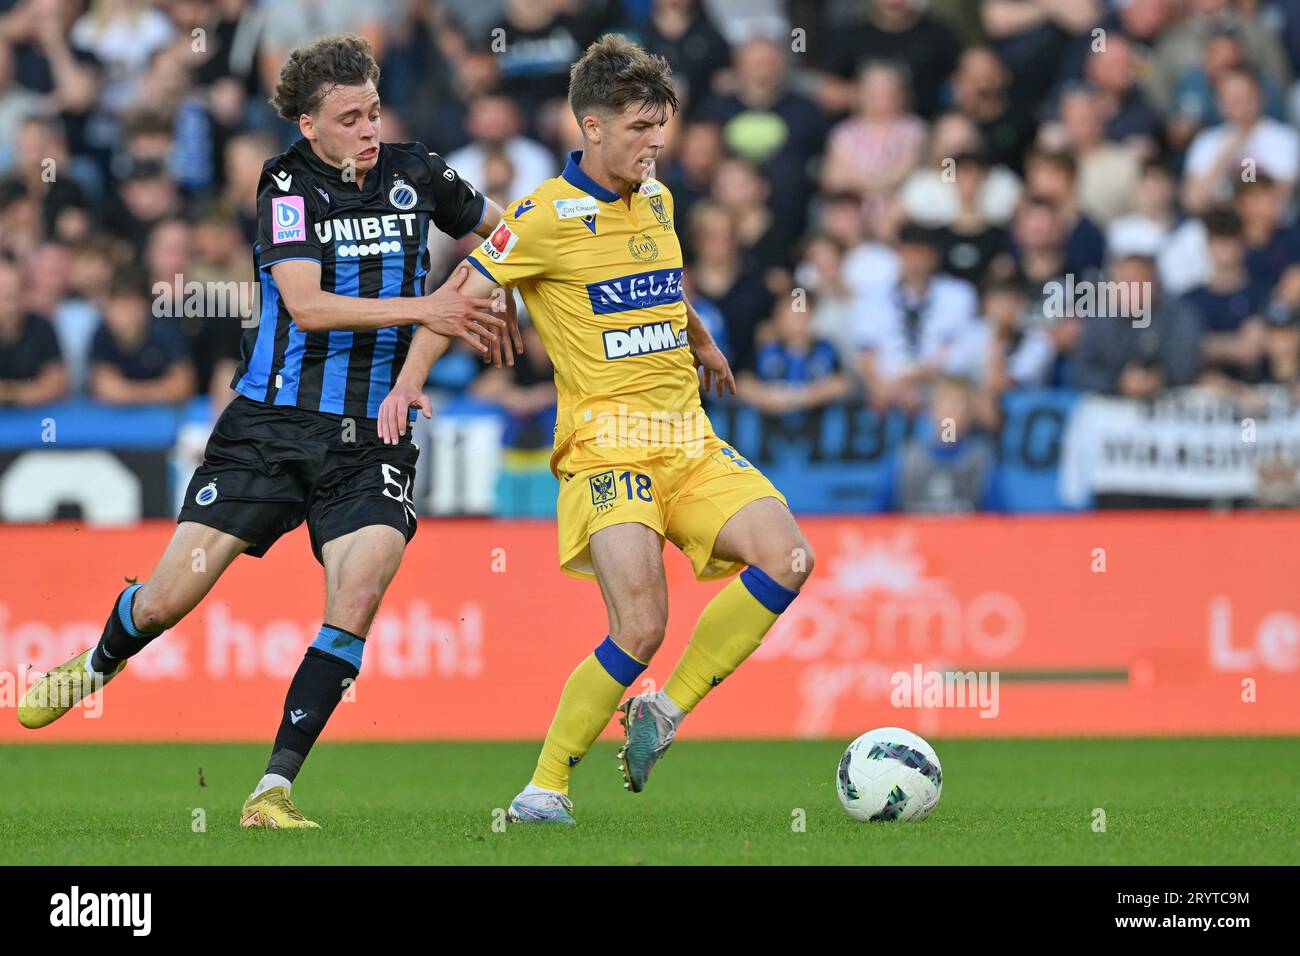 Maxim De Cuyper (55) of Club Brugge fighting for the ball with Jarne  Steuckers (18) of STVV during the Jupiler Pro League season 2023 - 2024  match day 9 between Club Brugge